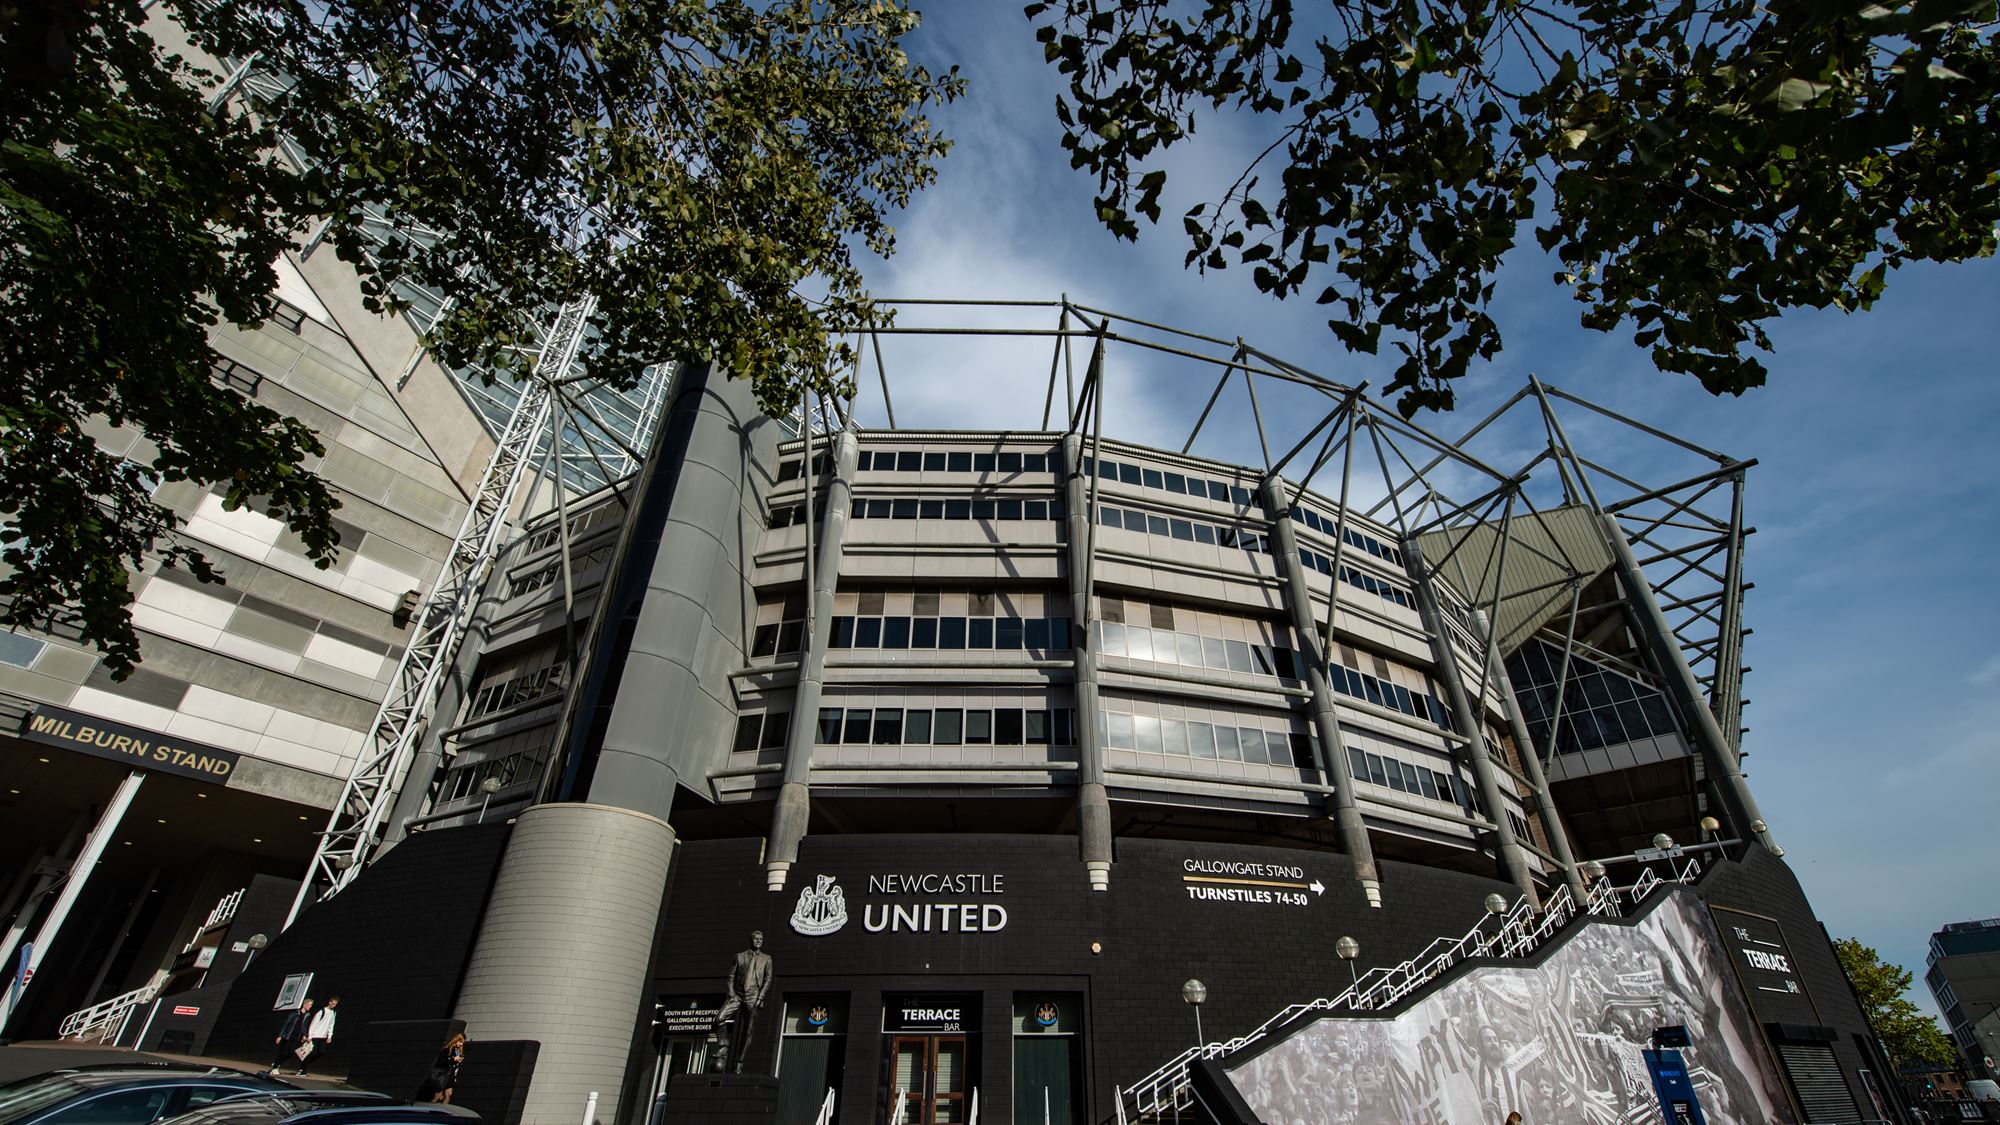 Saudi PIF to take over Newcastle United in $407 million deal